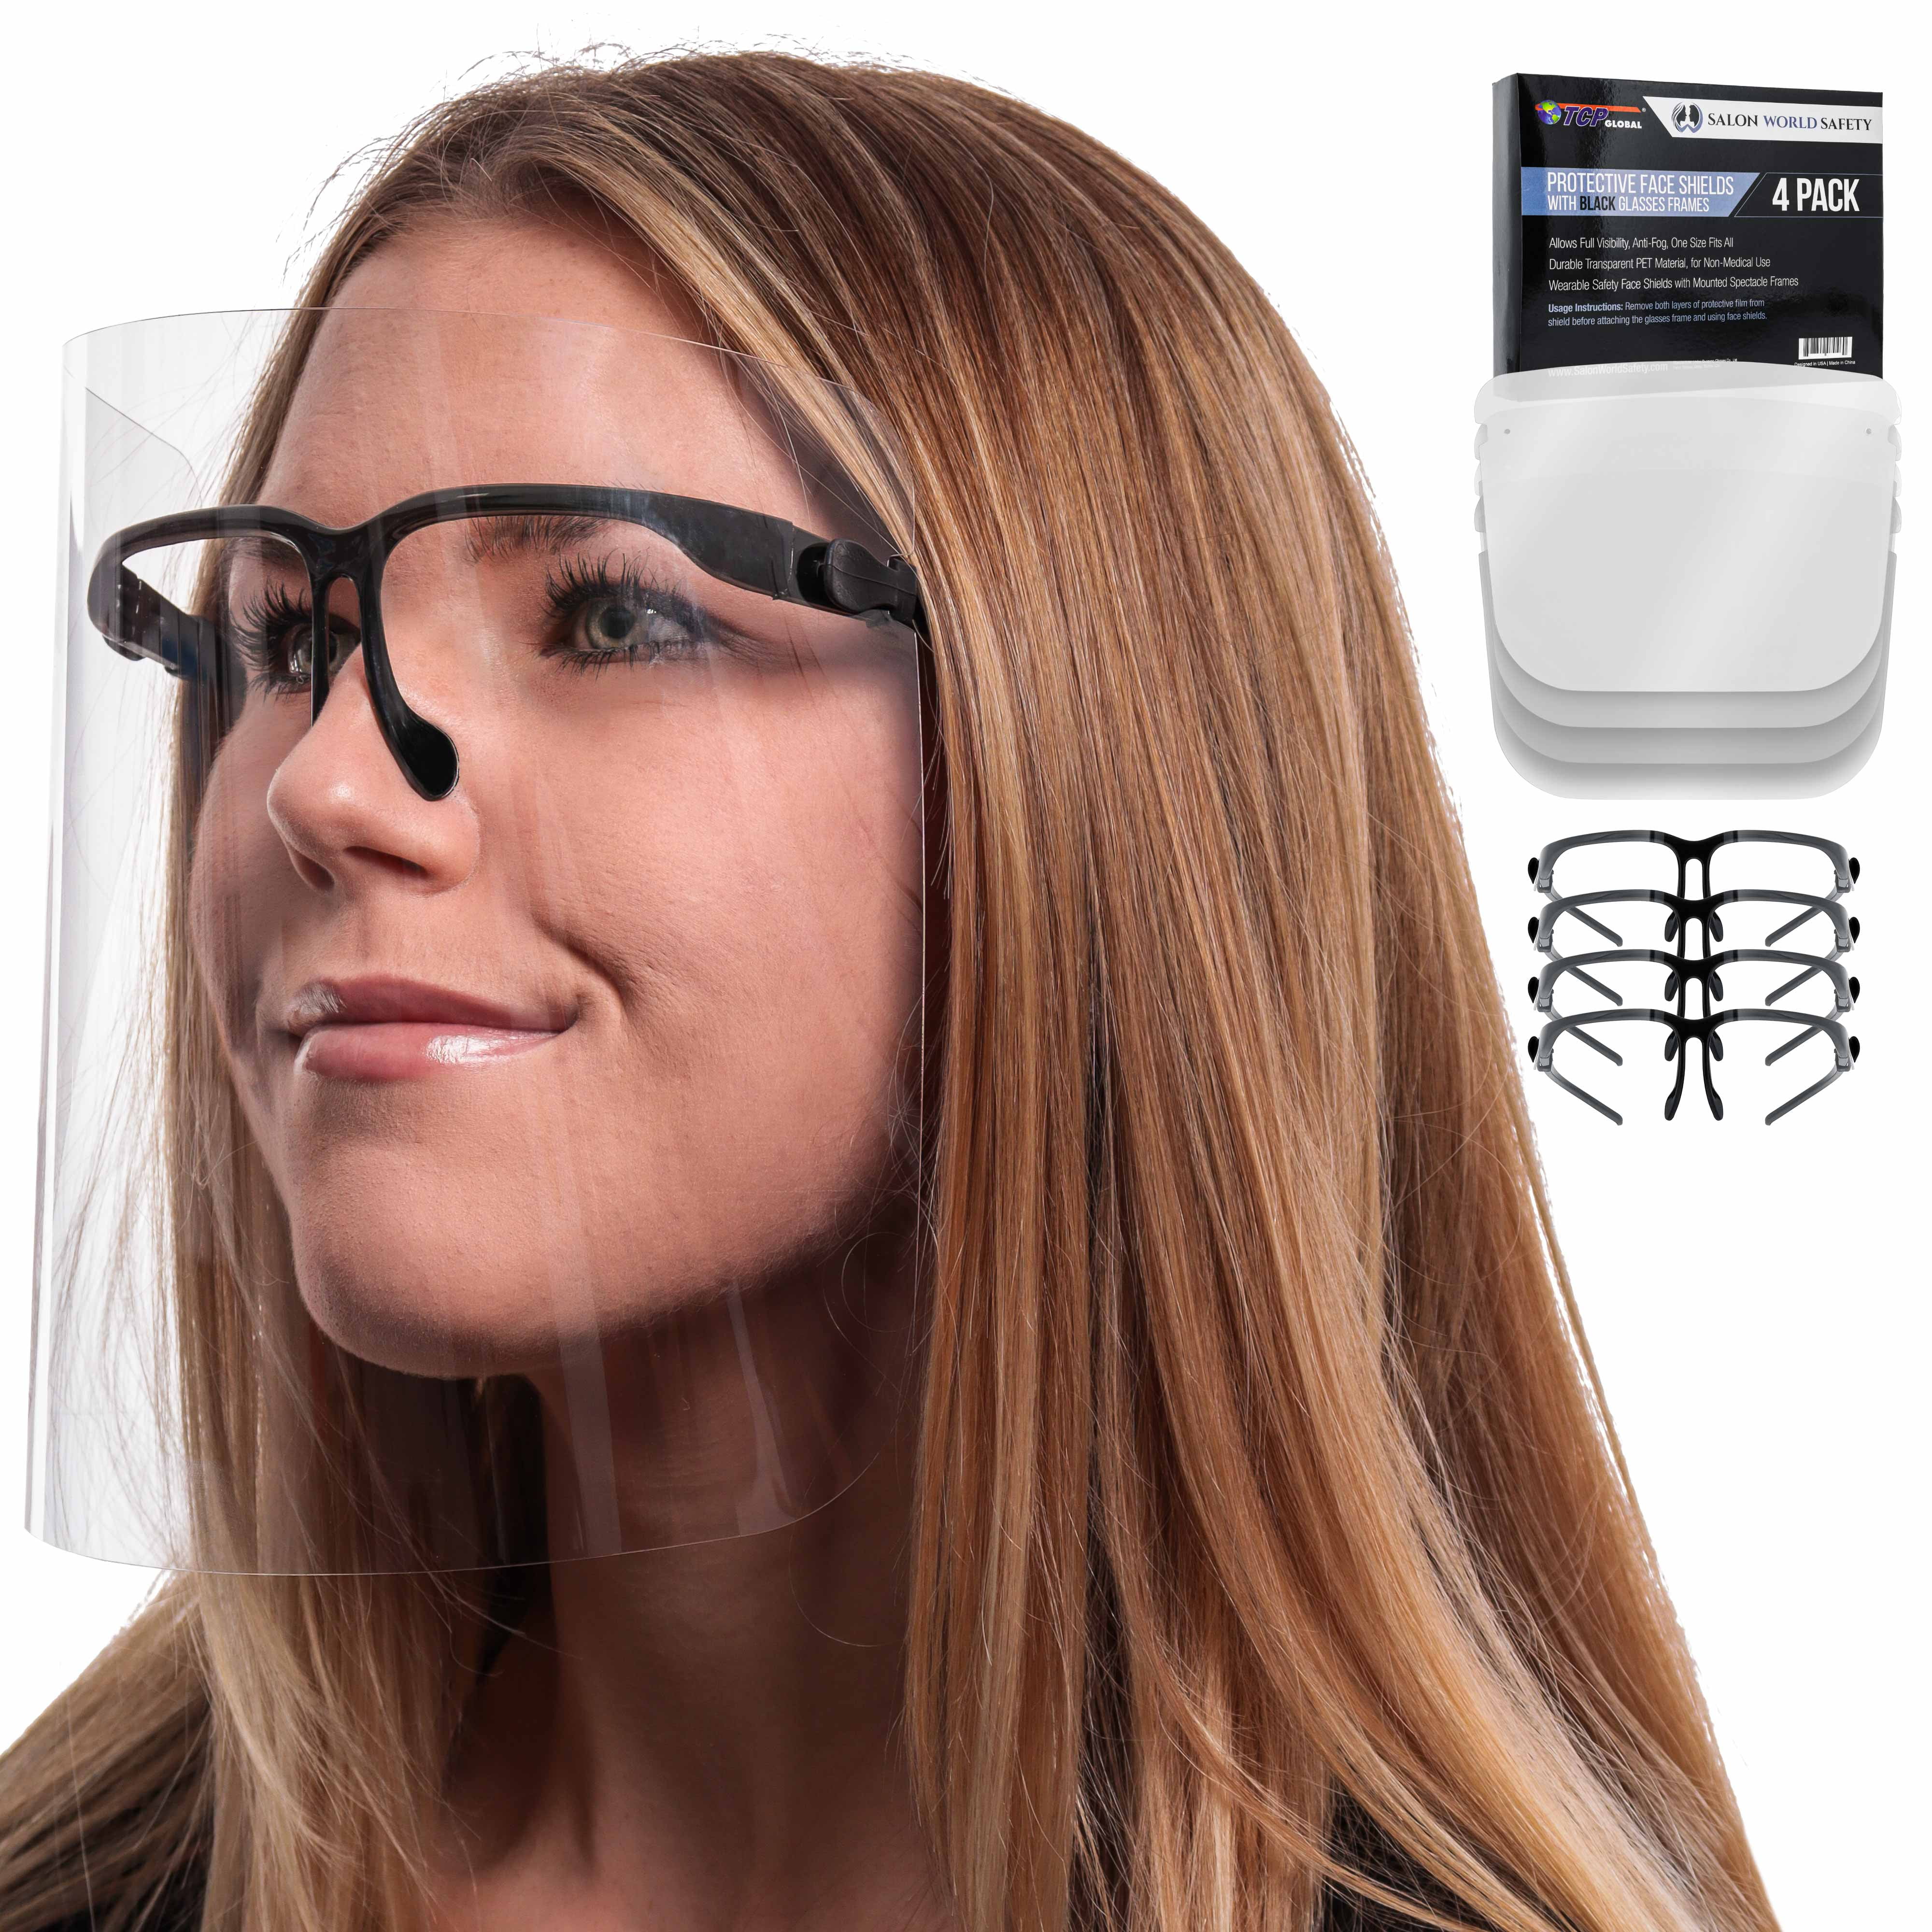 1 PC,2 PCS,5 PCS,SAFETY FULL FACE SHIELD GUARD PROTECTOR,CLEAR GLASSES 